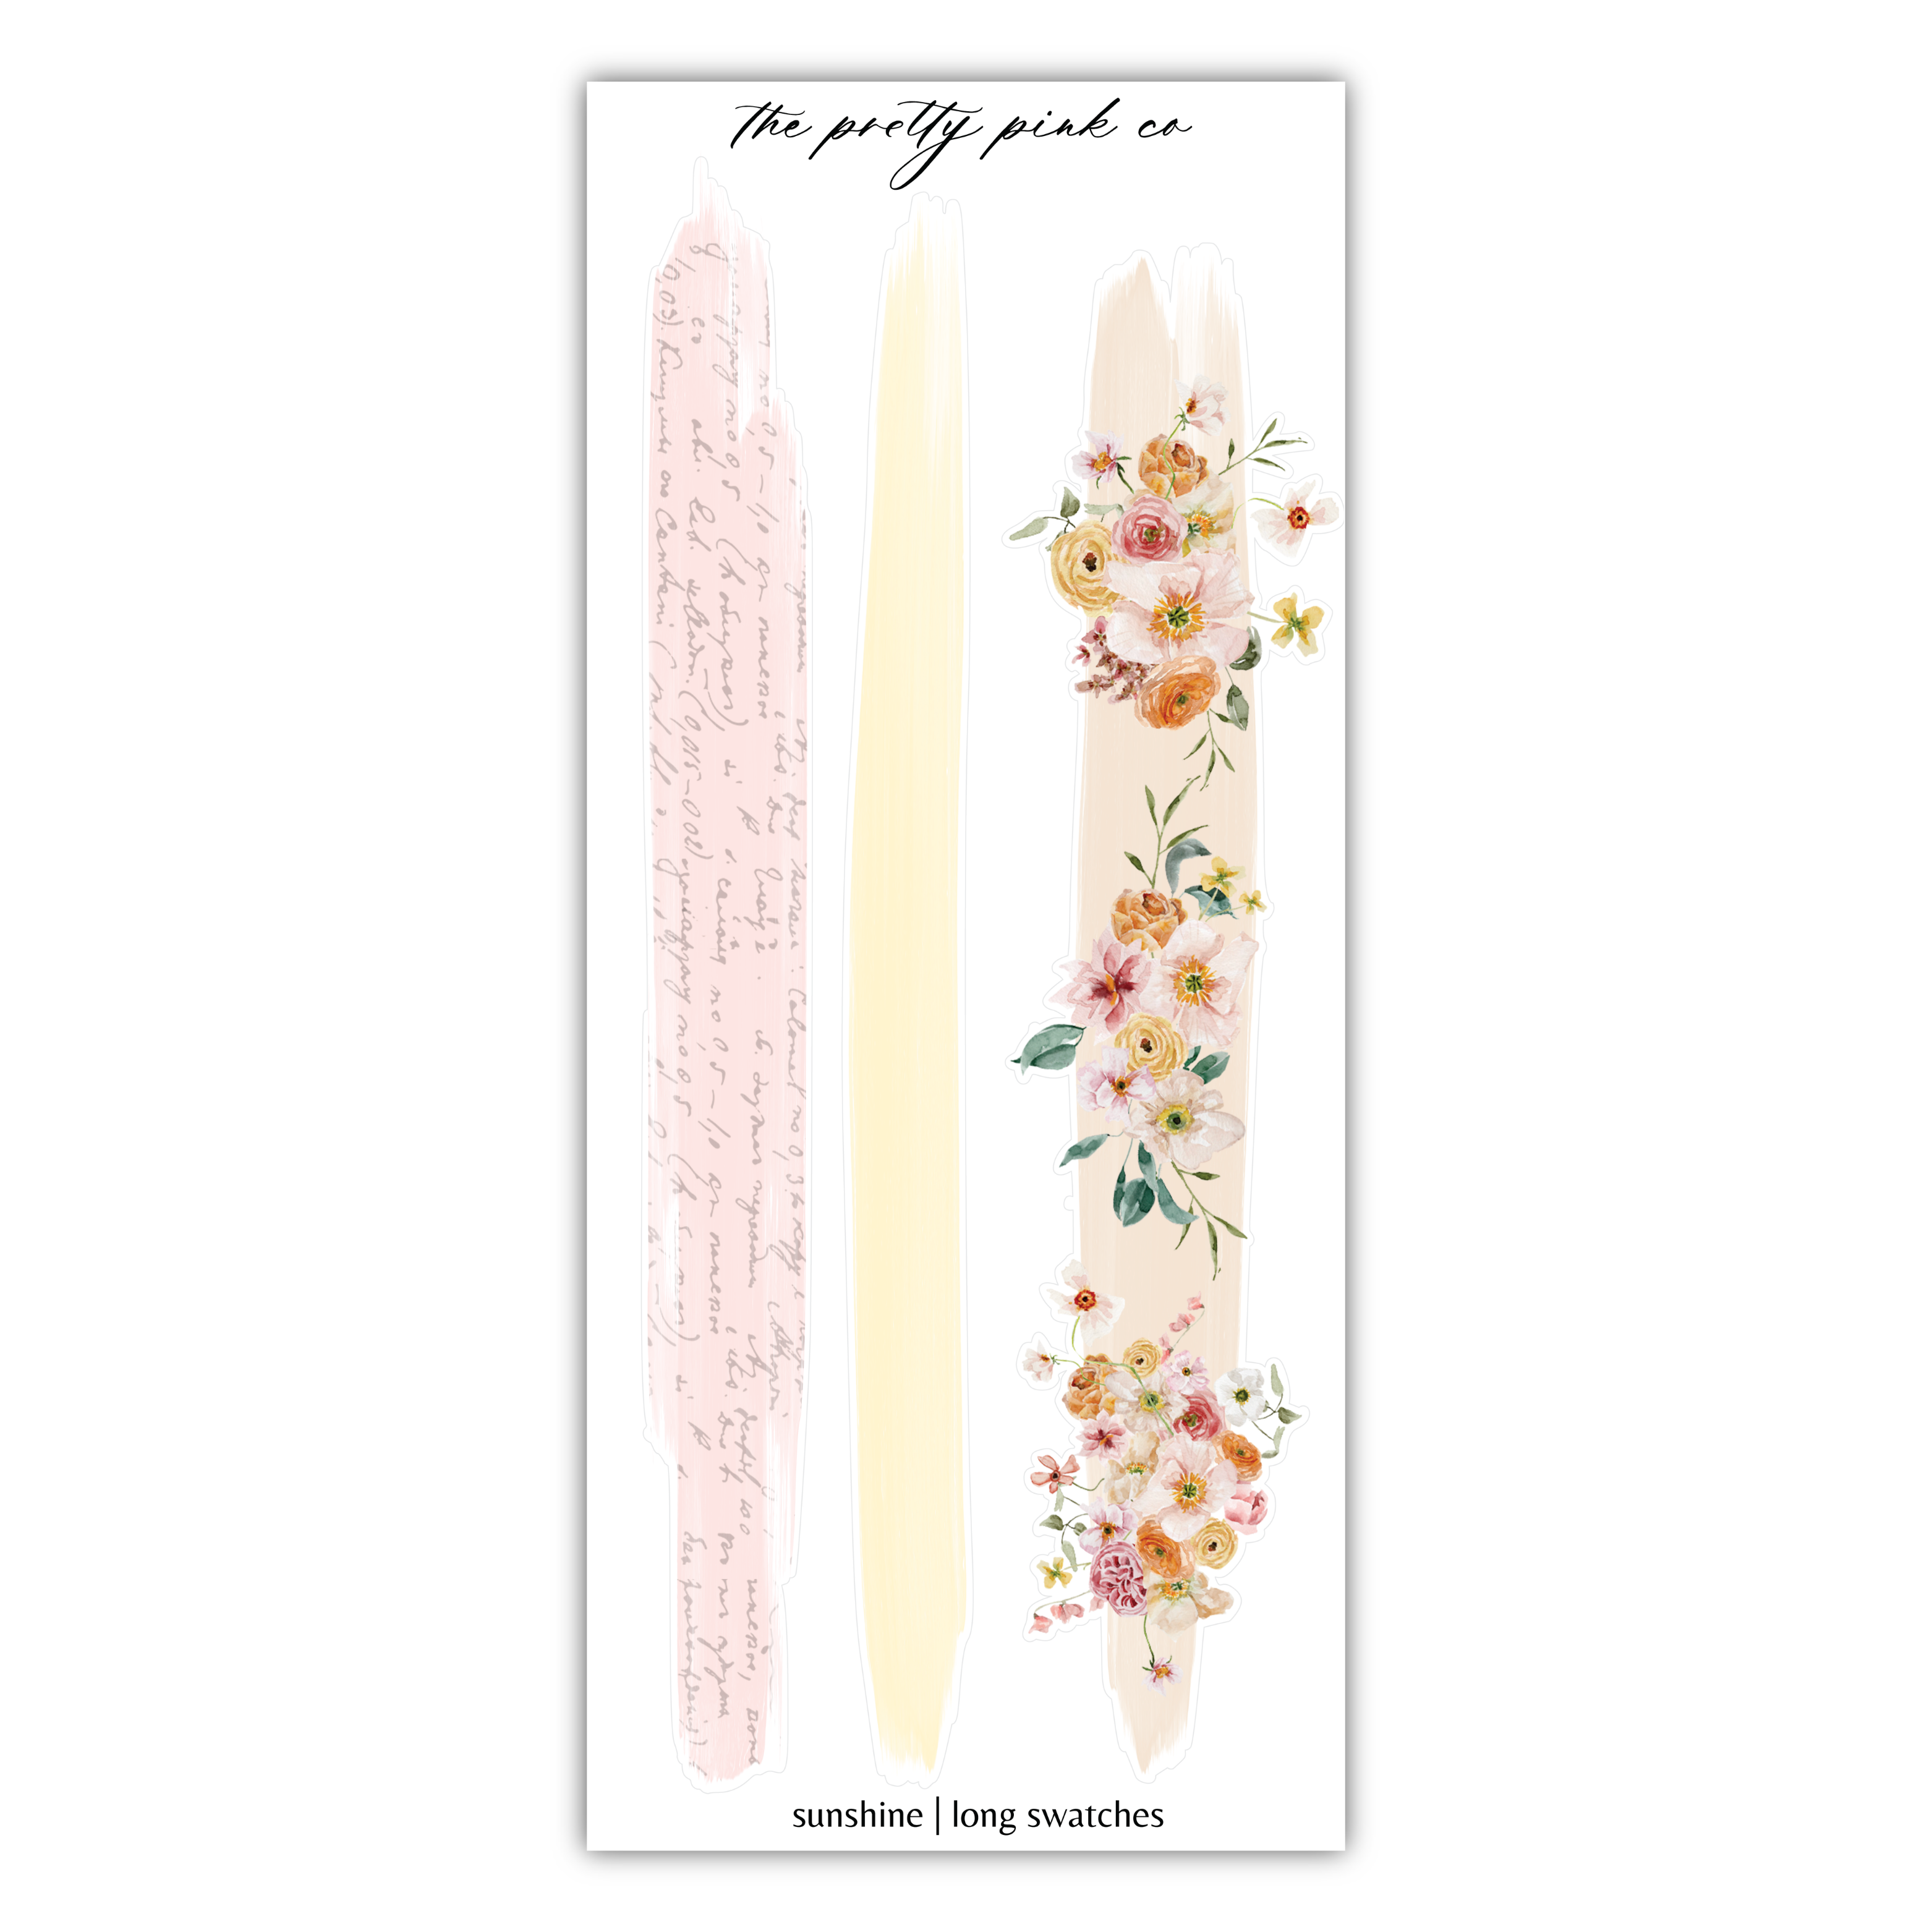 a card with flowers and writing on it